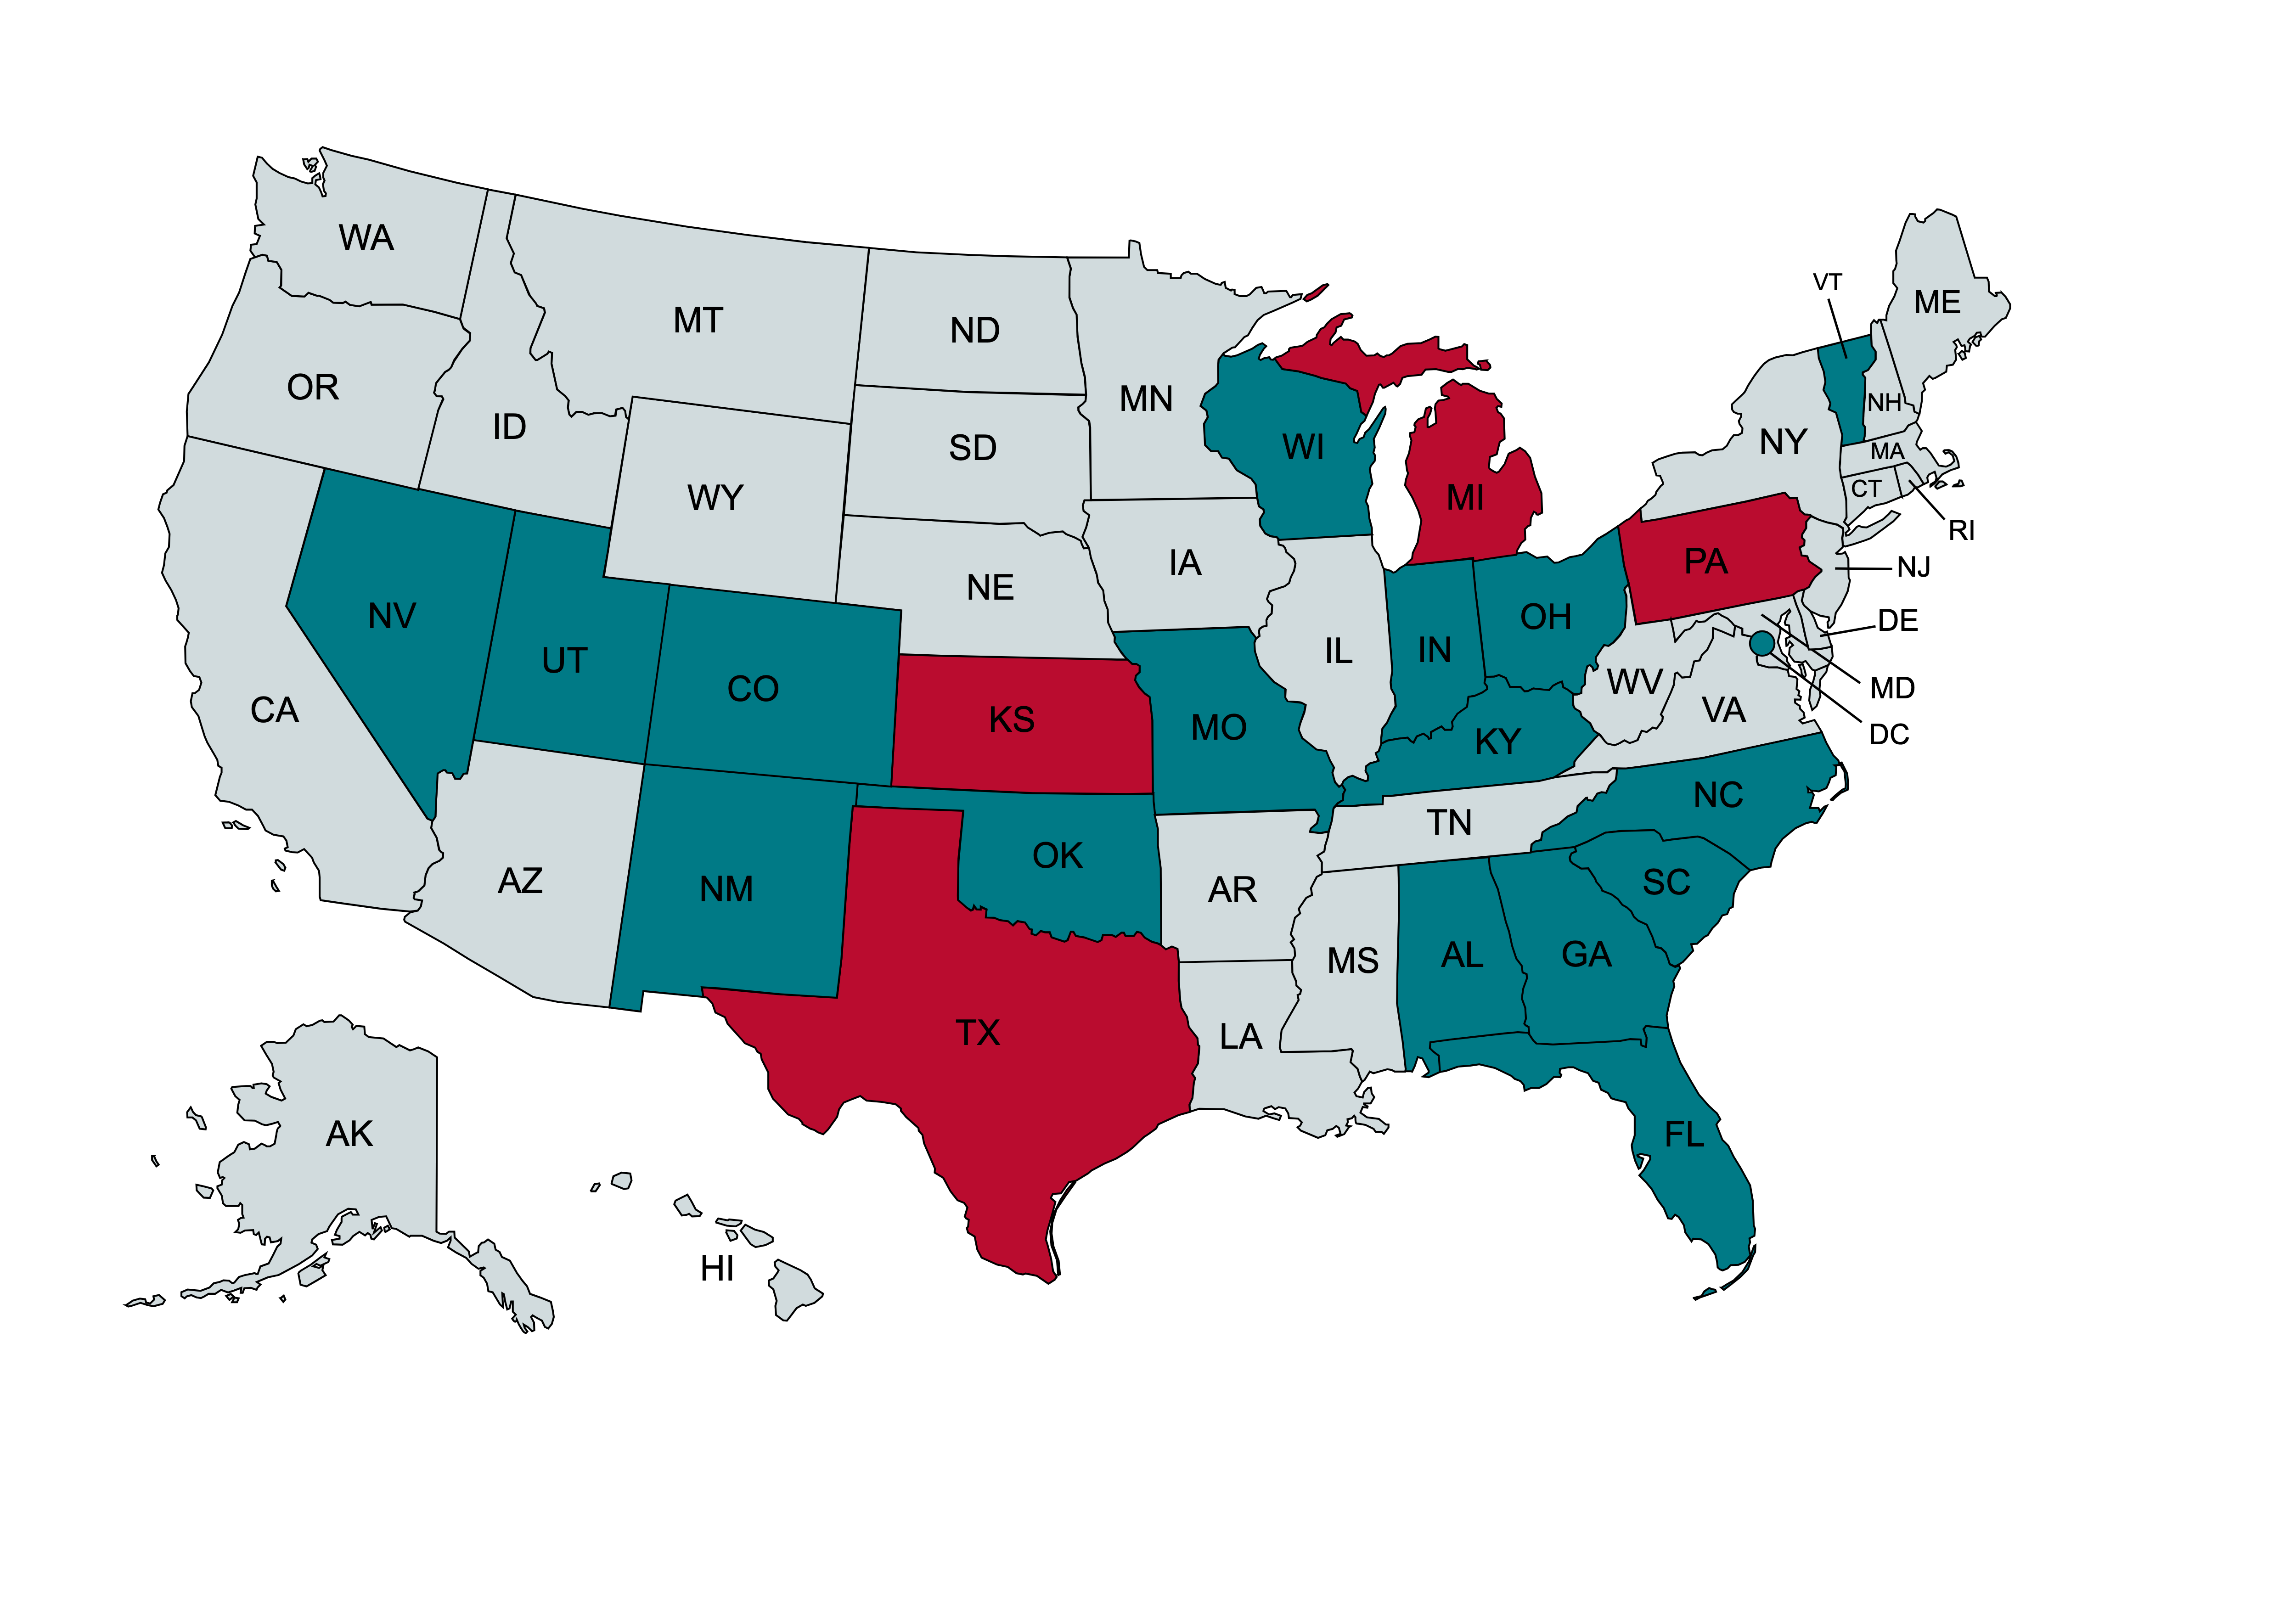 Ynited states map where AAs and CAAs are employed